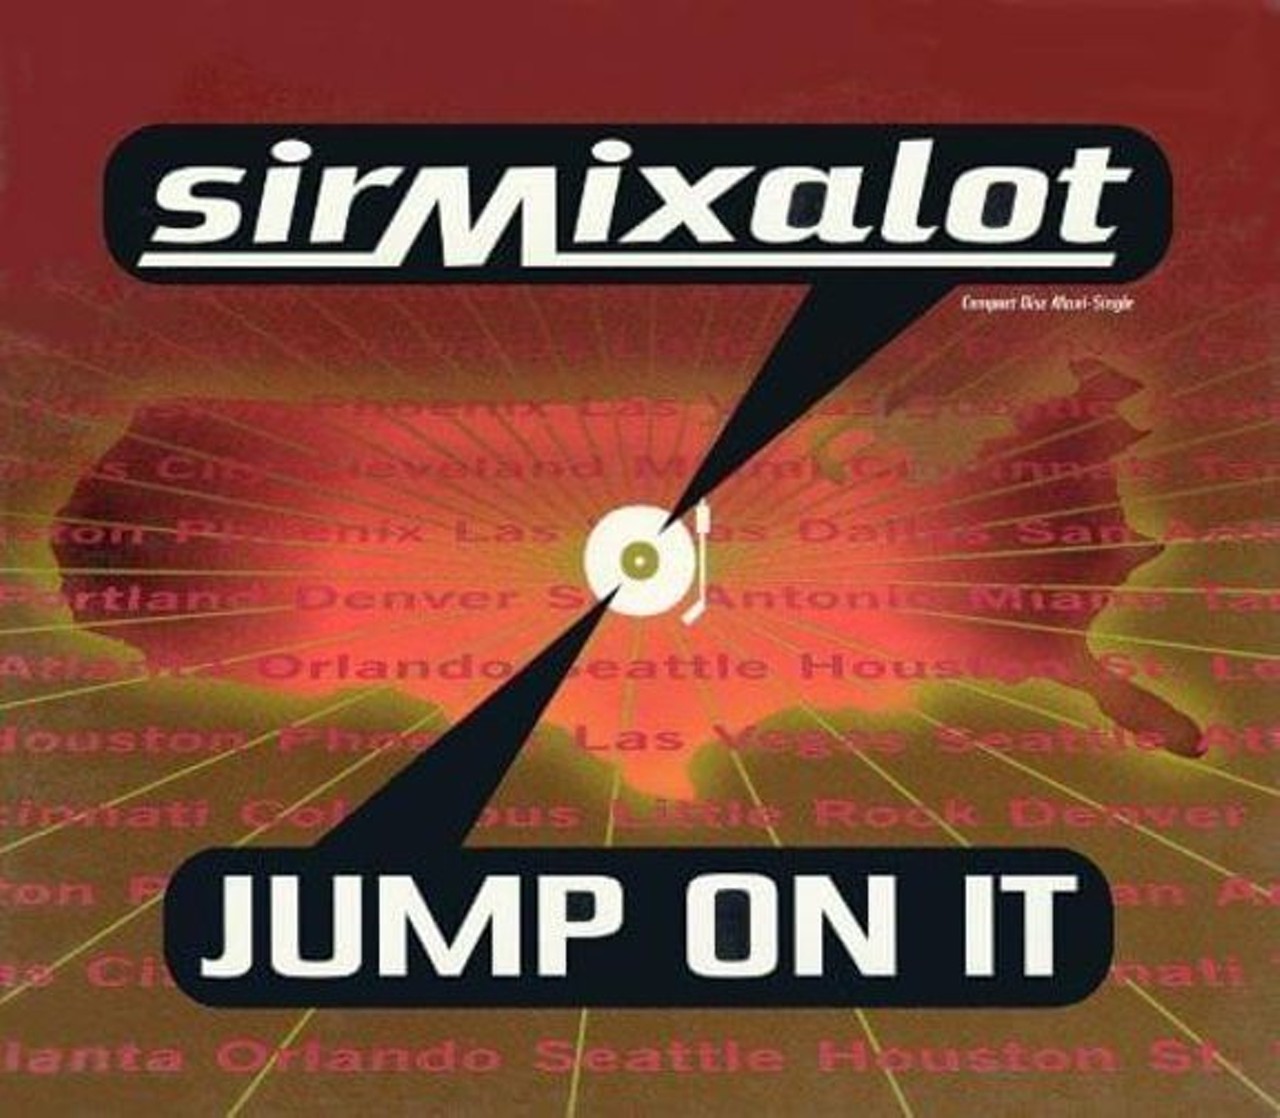 "Jump On It" by Sir Mix-a-Lot
What's up Cincinnati, what's up